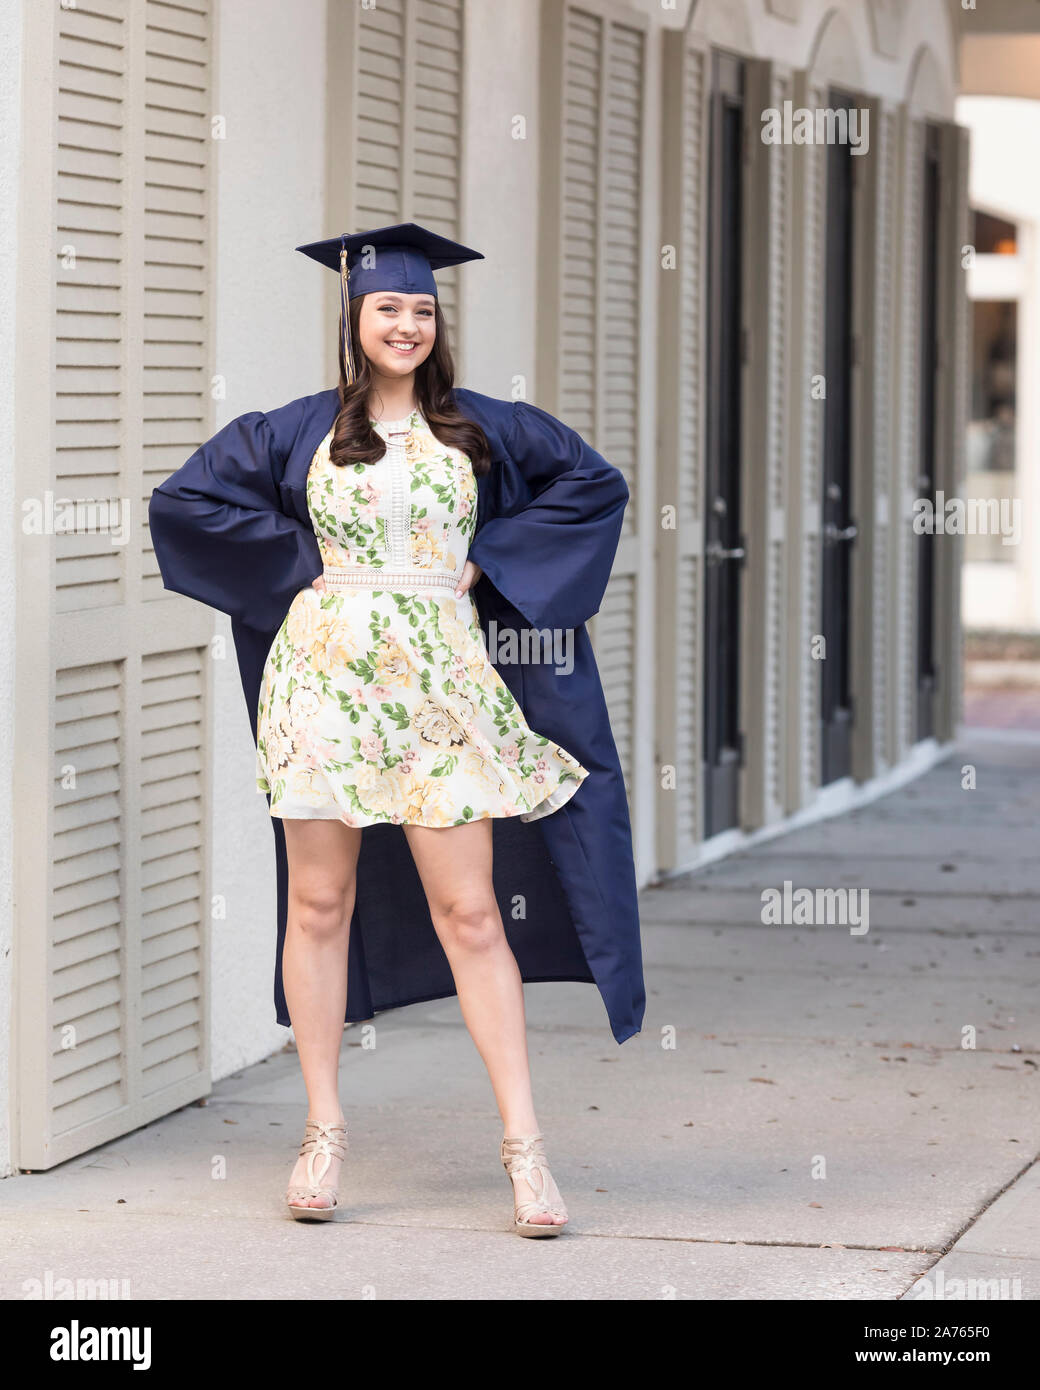 Graduating senior in cap and gown and floral dress poses on street Stock Photo